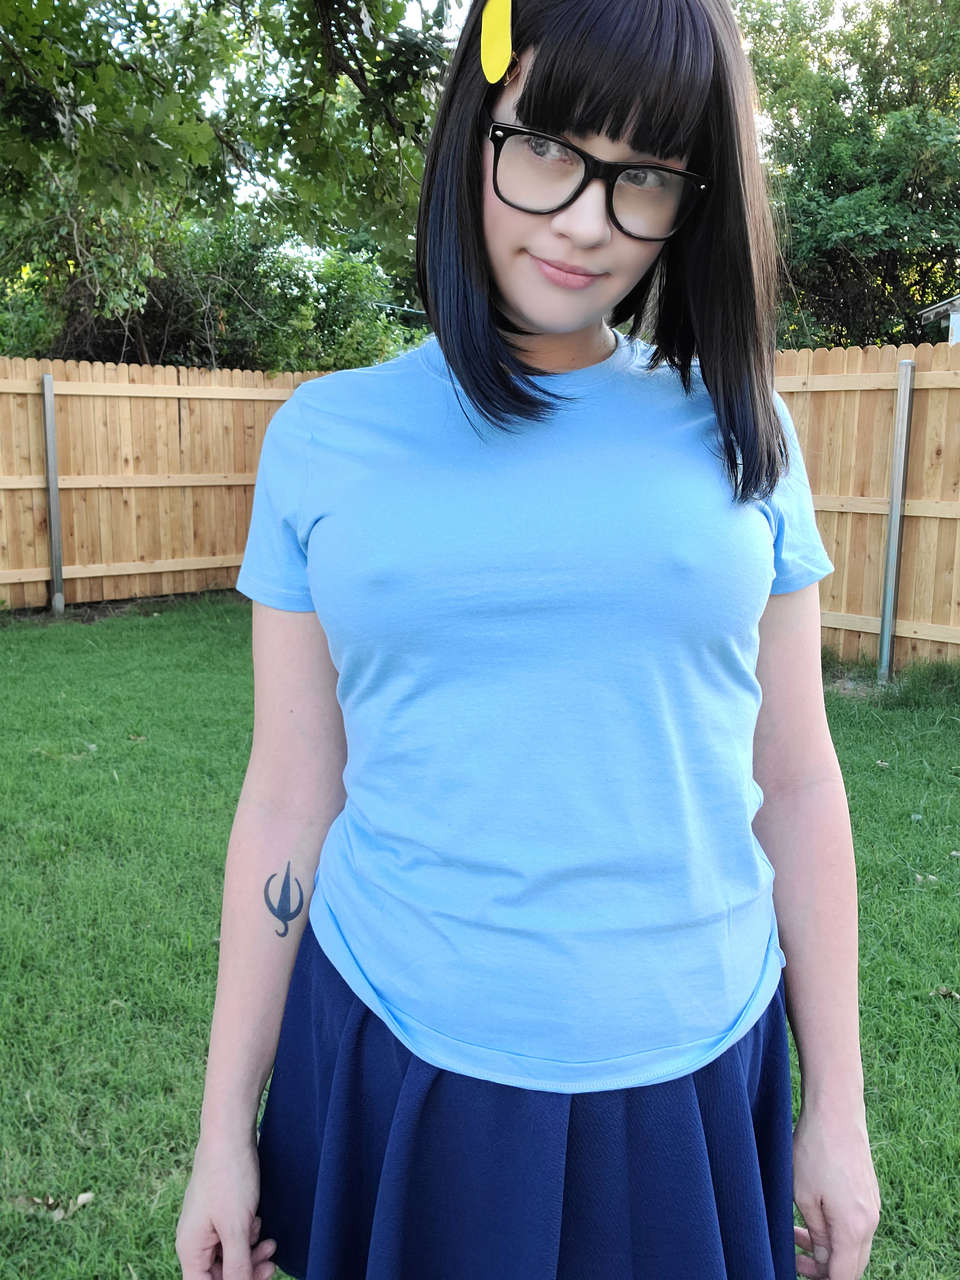 Tina From Bobs Burgers By Hotnspook